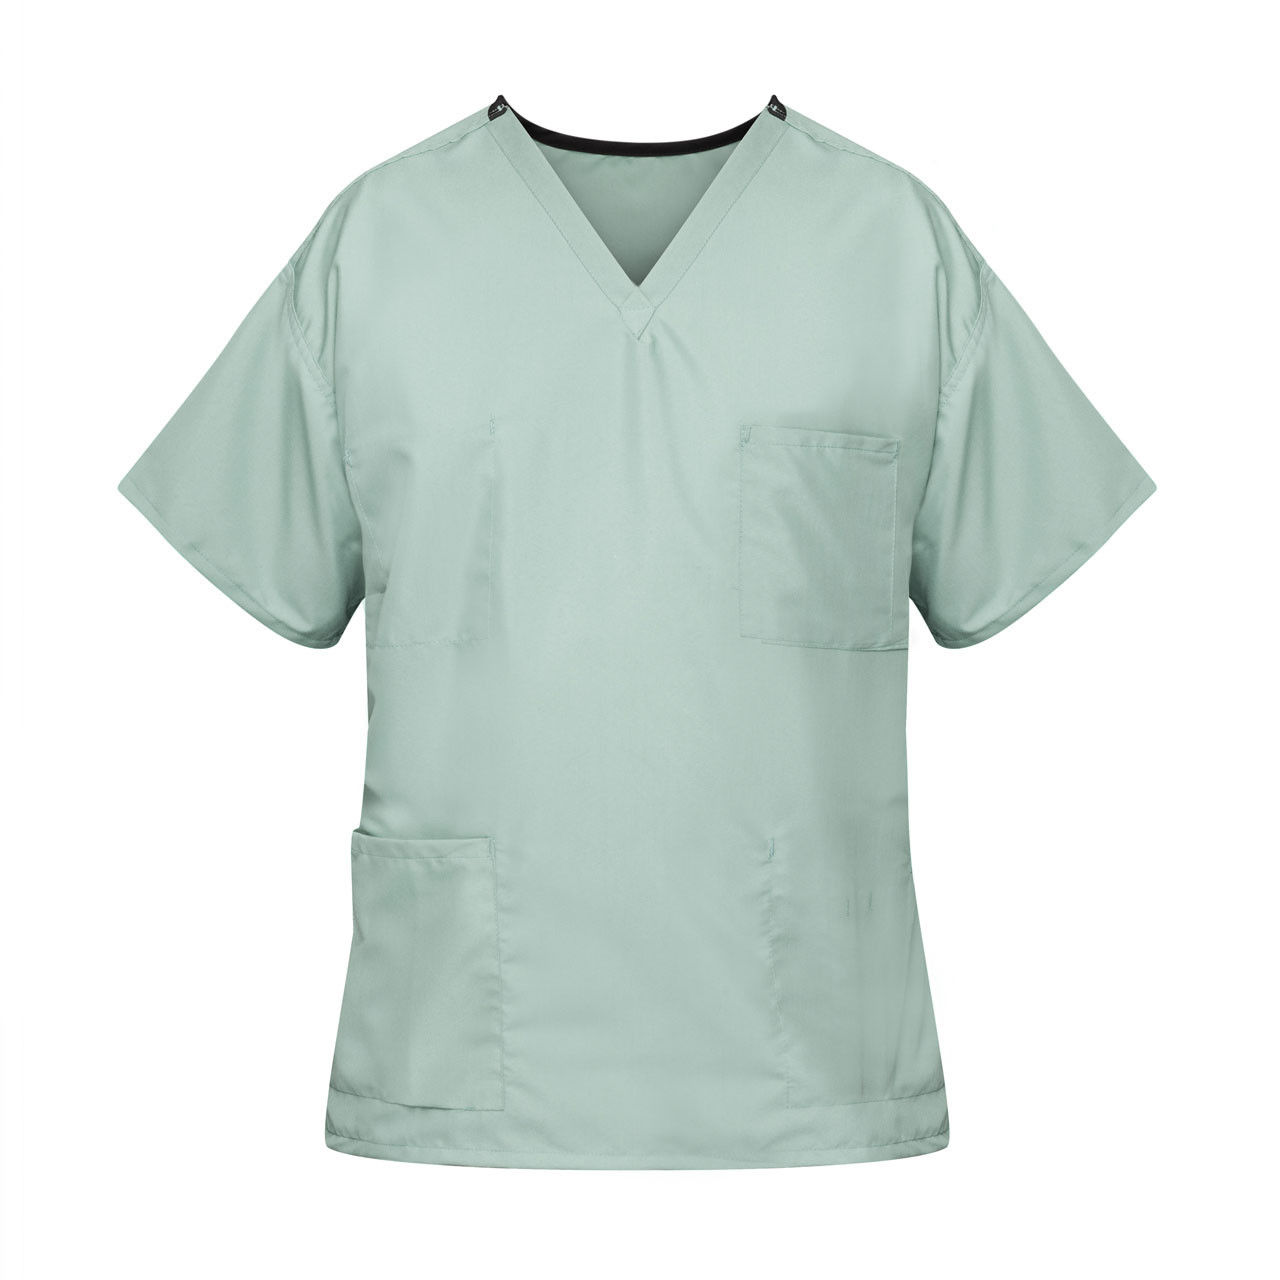 What is the method to determine the correct size for Misty Green Scrubs?